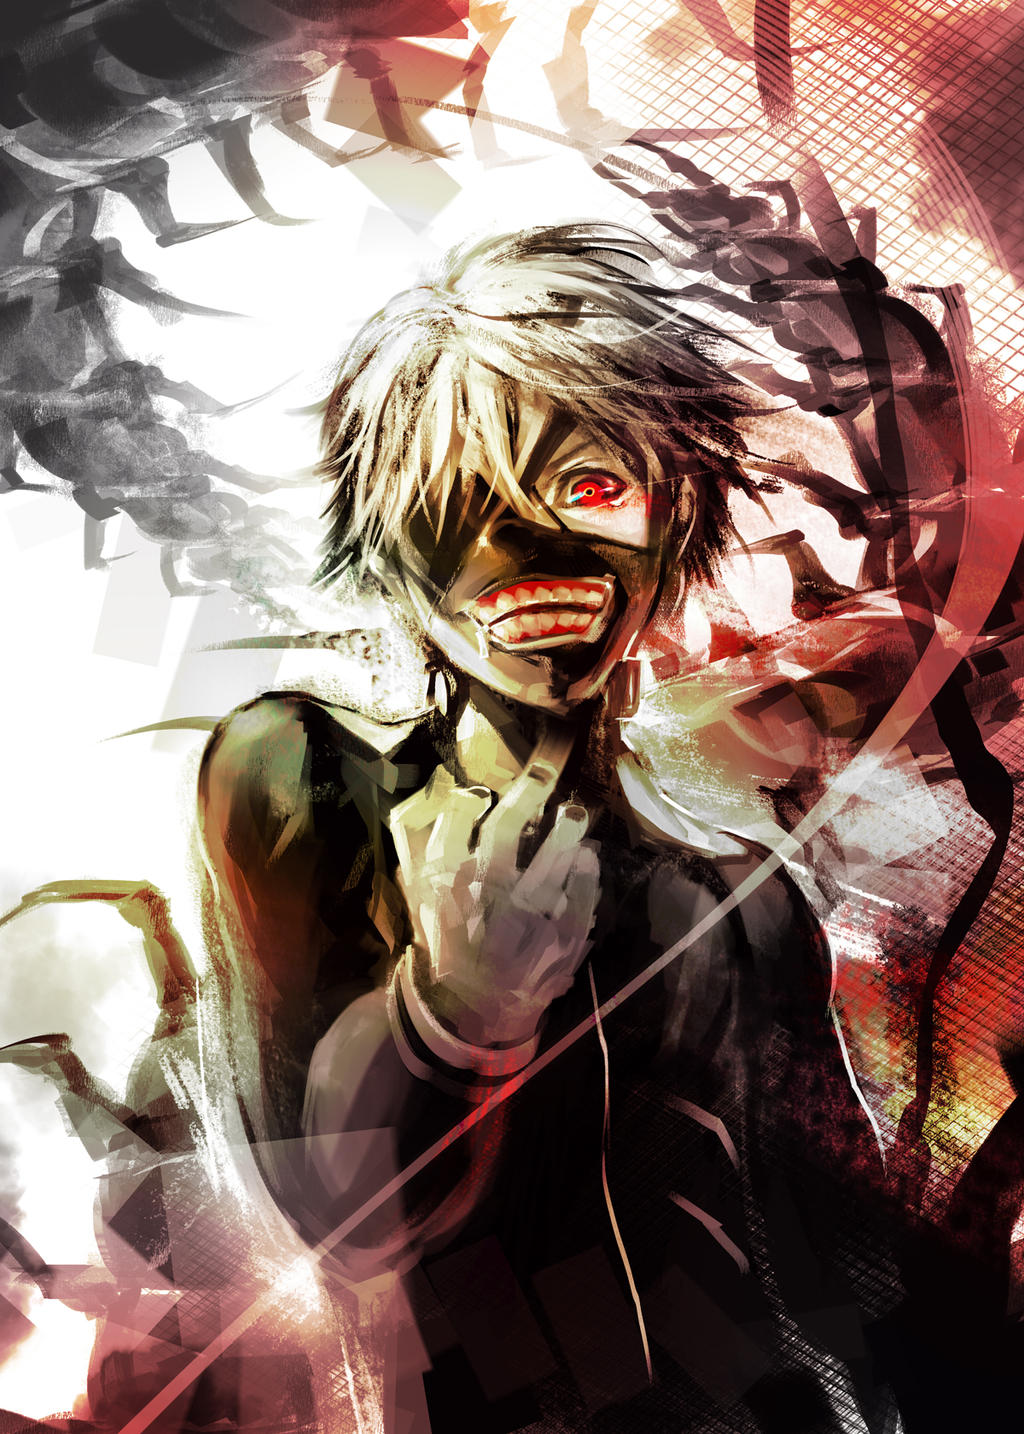 Tokyo Ghoul Wallpaper 1920 X 1080 HD By Say0chi On DeviantArt